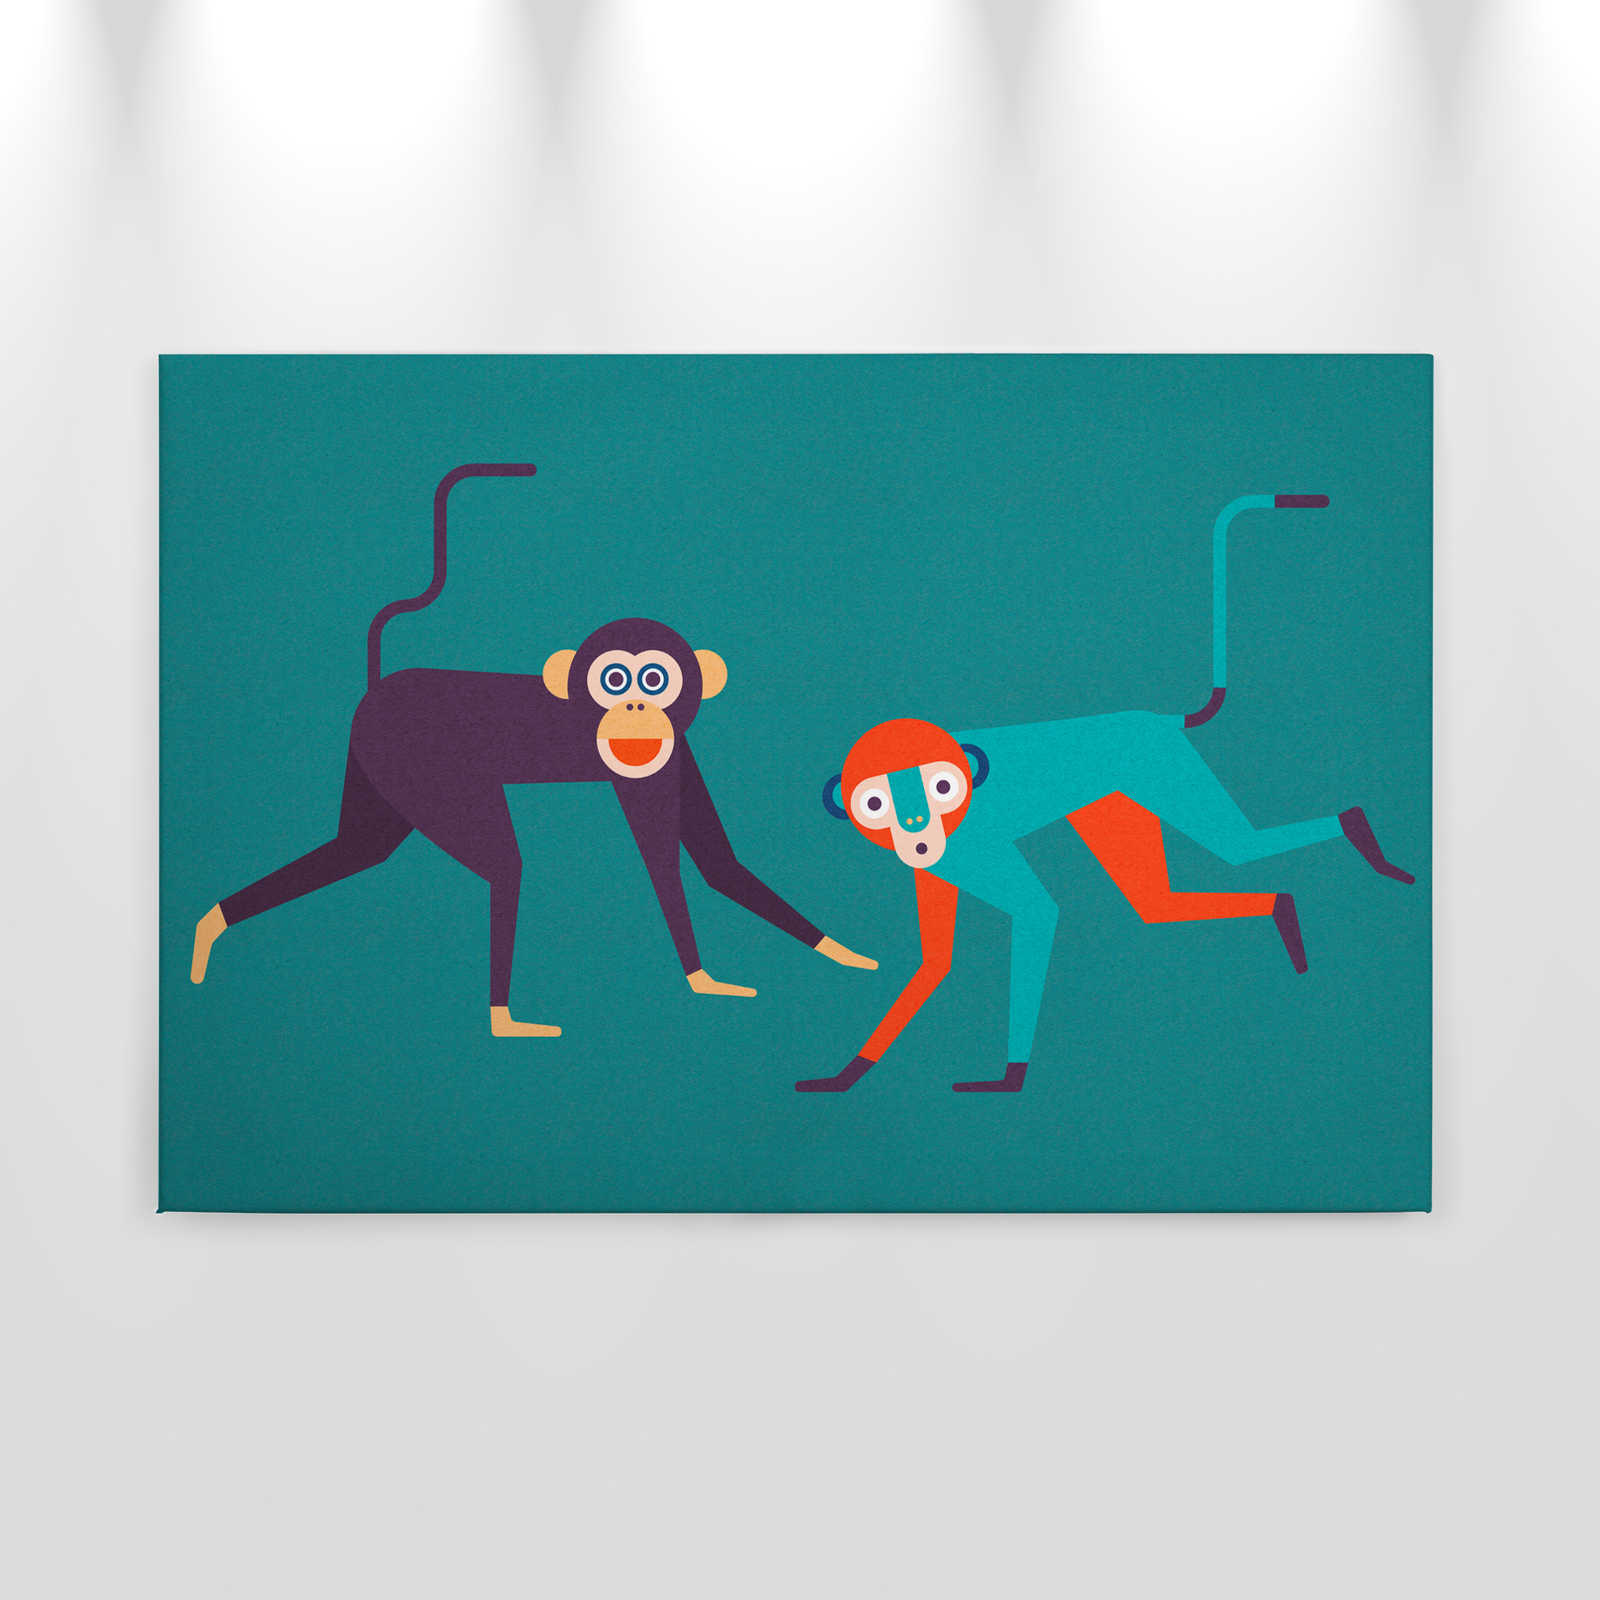             Monkey Business 1 - Canvas painting in cardboard structure, monkey gang in comic style - 0.90 m x 0.60 m
        